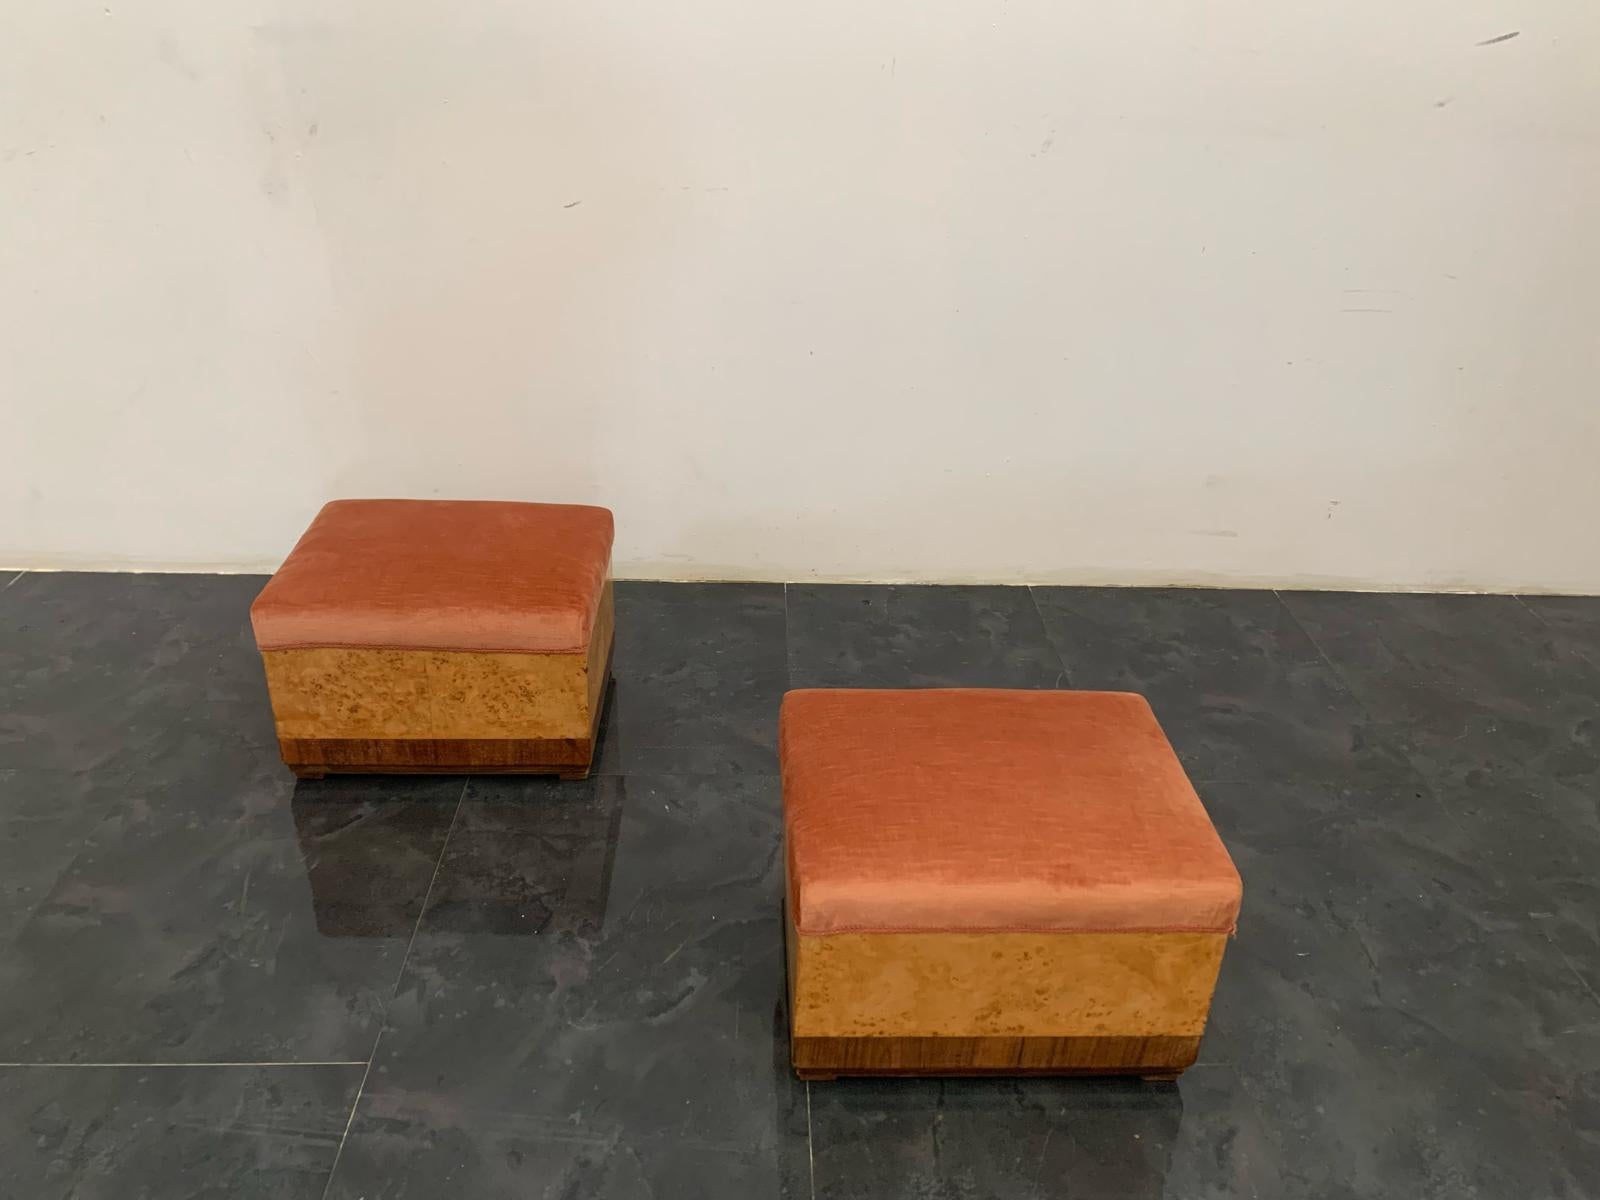 Art Deco Rational Poufs in Tuja Root, 1930s For Sale 7